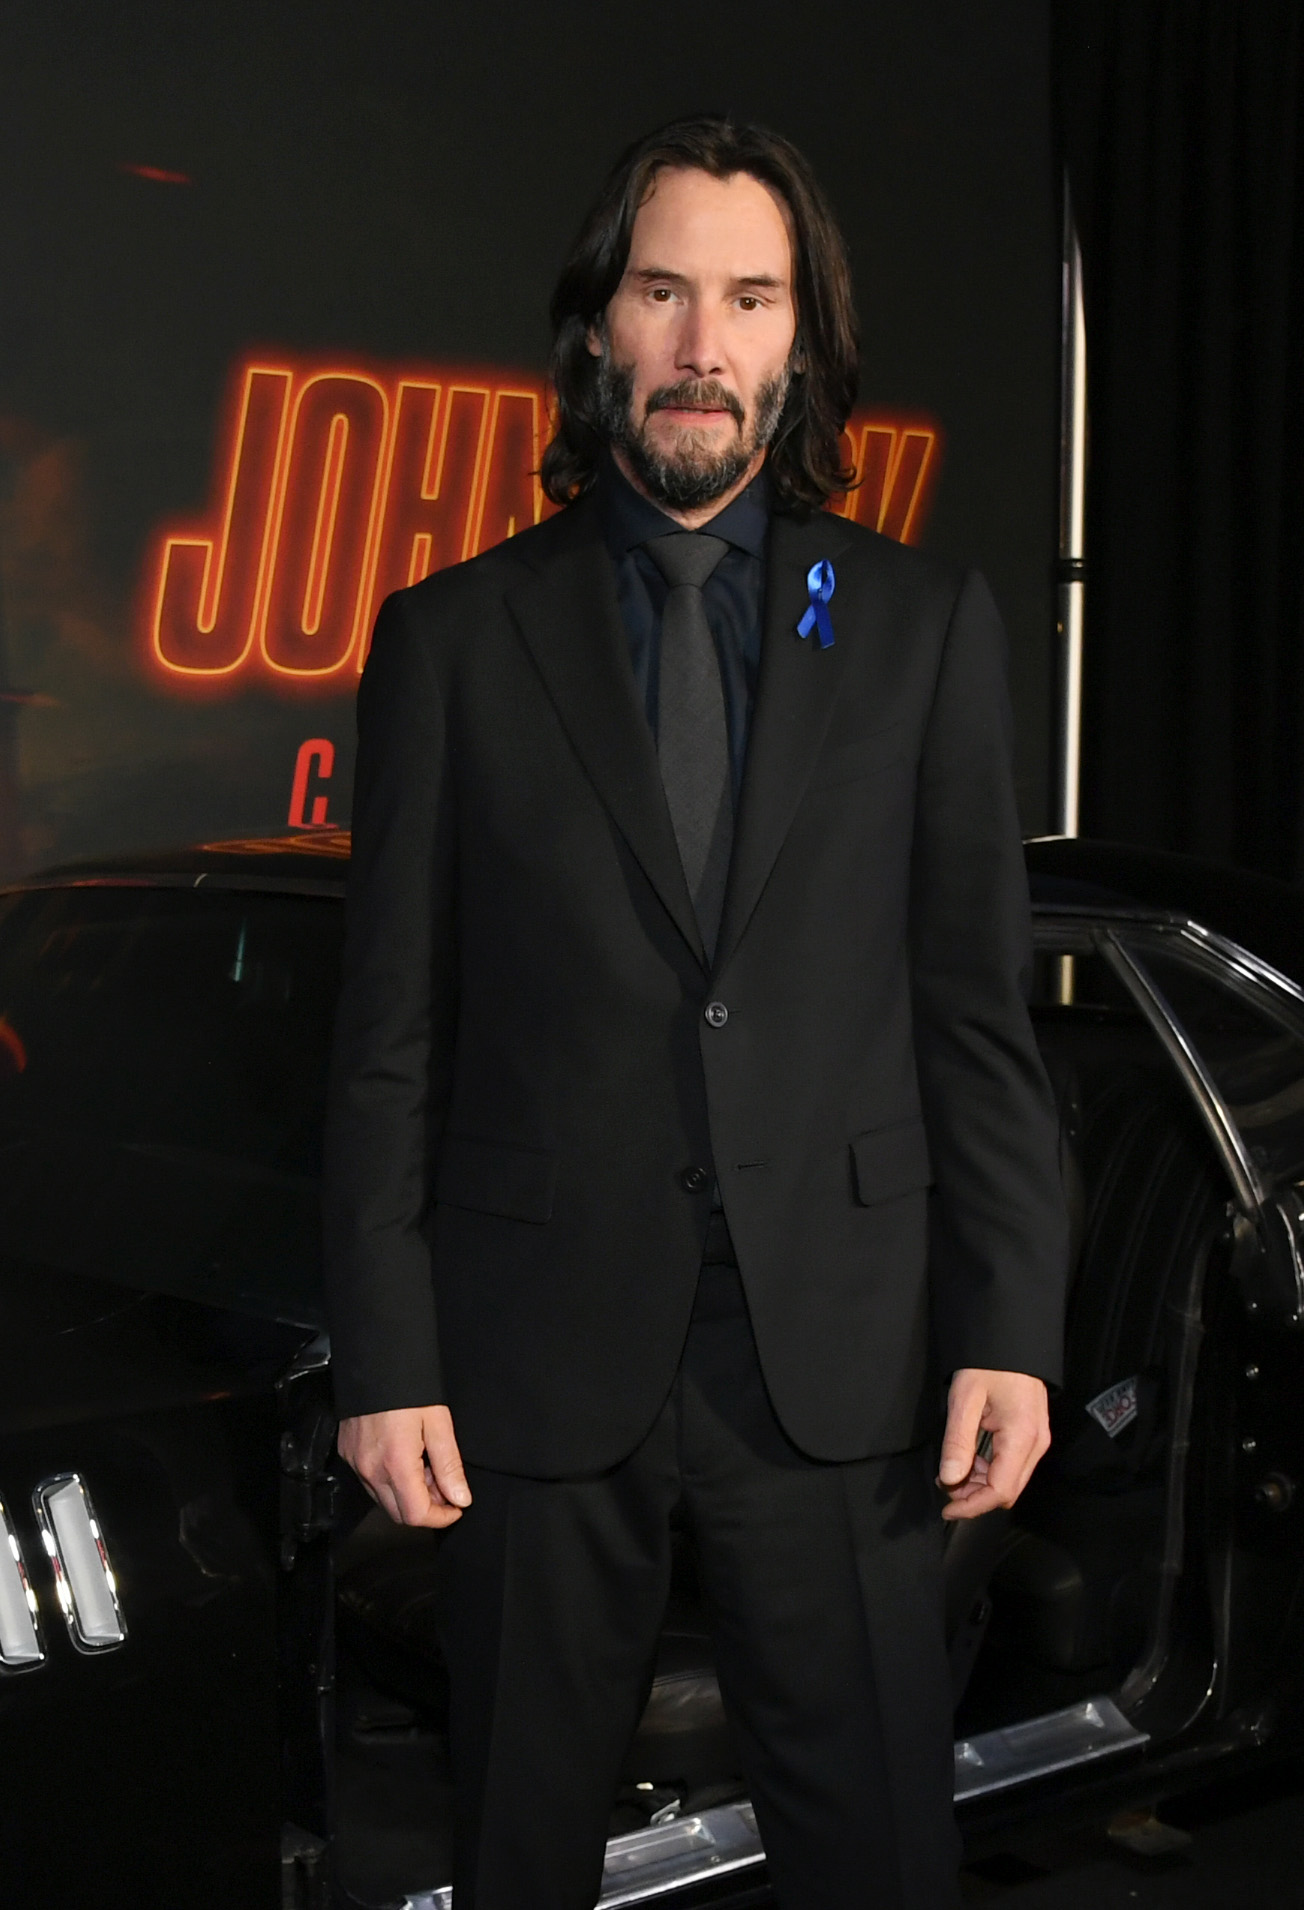 bao admire john wick s million dollar super car set that will be auctioned for charity in chicago this weekend 653cb2c17cb20 Admire John Wick's Million Dollar Super Car Set That Will Be Auctioned For Charity In Chicago This Weekend